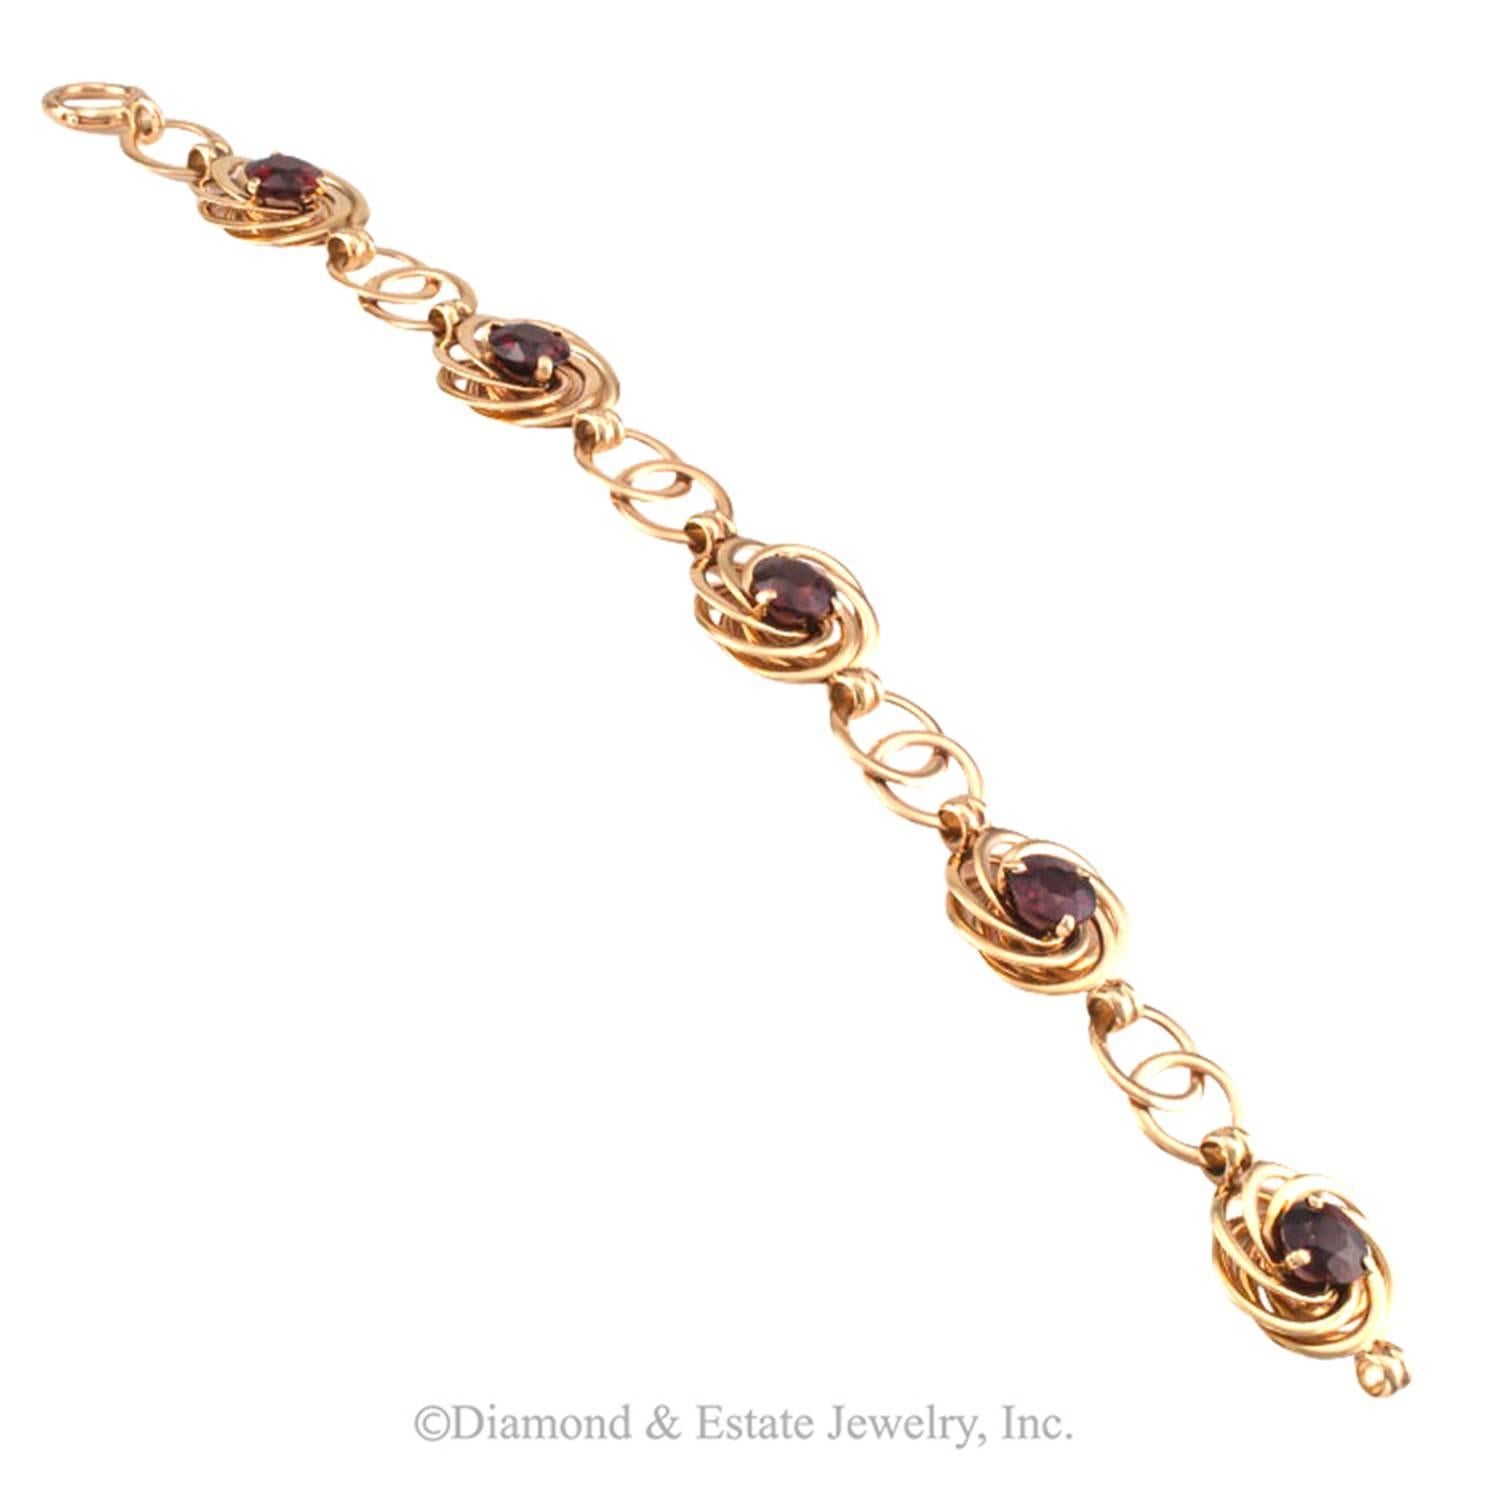 Retro Garnet and Gold Bracelet Circa 1940

It is all about circles.  Circles chasing each other and forming circular florets at even intervals.  Each floret centers upon a bright garnet... pure Retro.  In contact with skin, the linkage feels silky